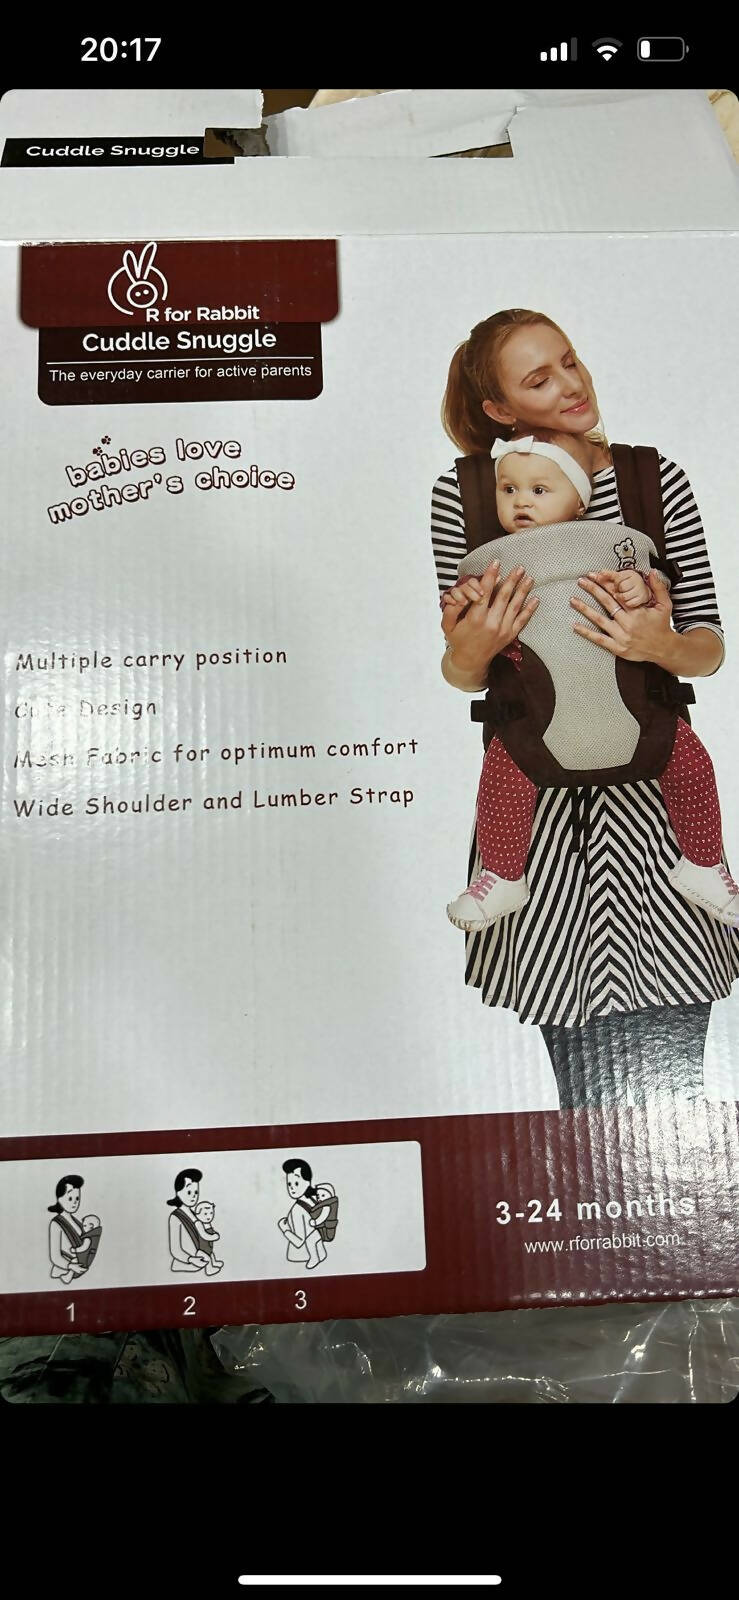 R FOR RABBIT Cuddle Snuggle Baby Carrier